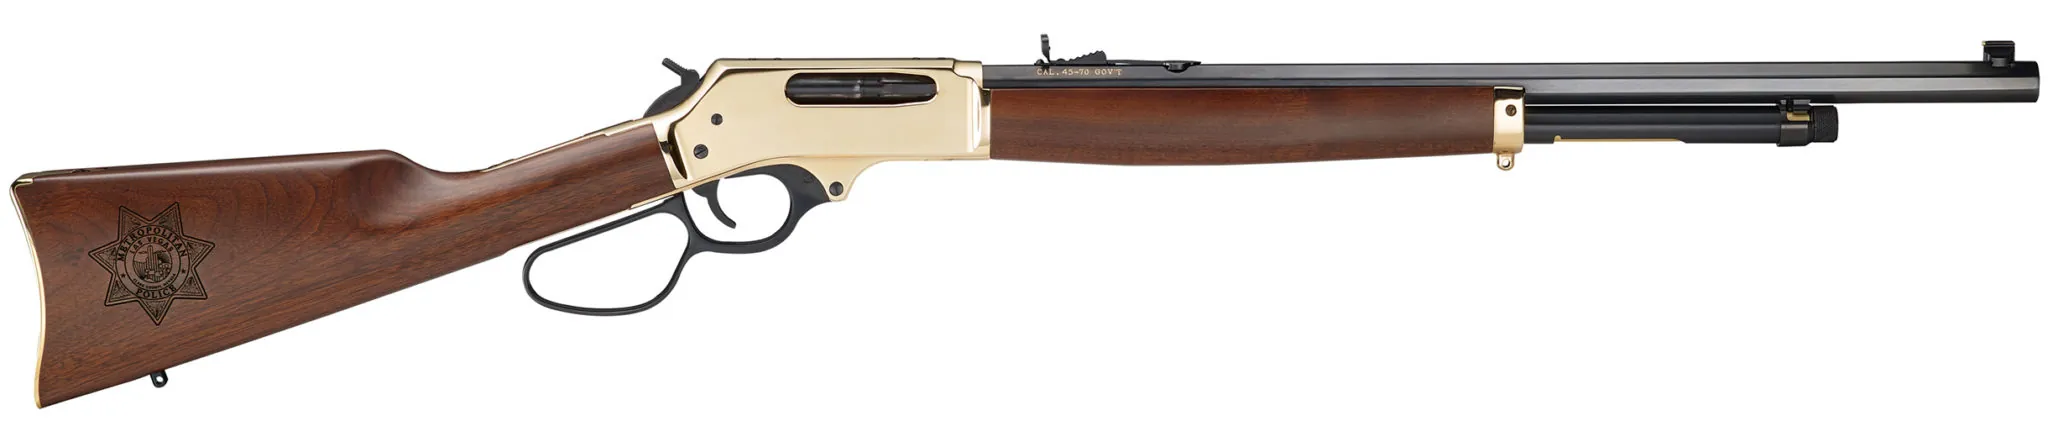 Henry Corporate Edtions Rifles-H010B-LVMP